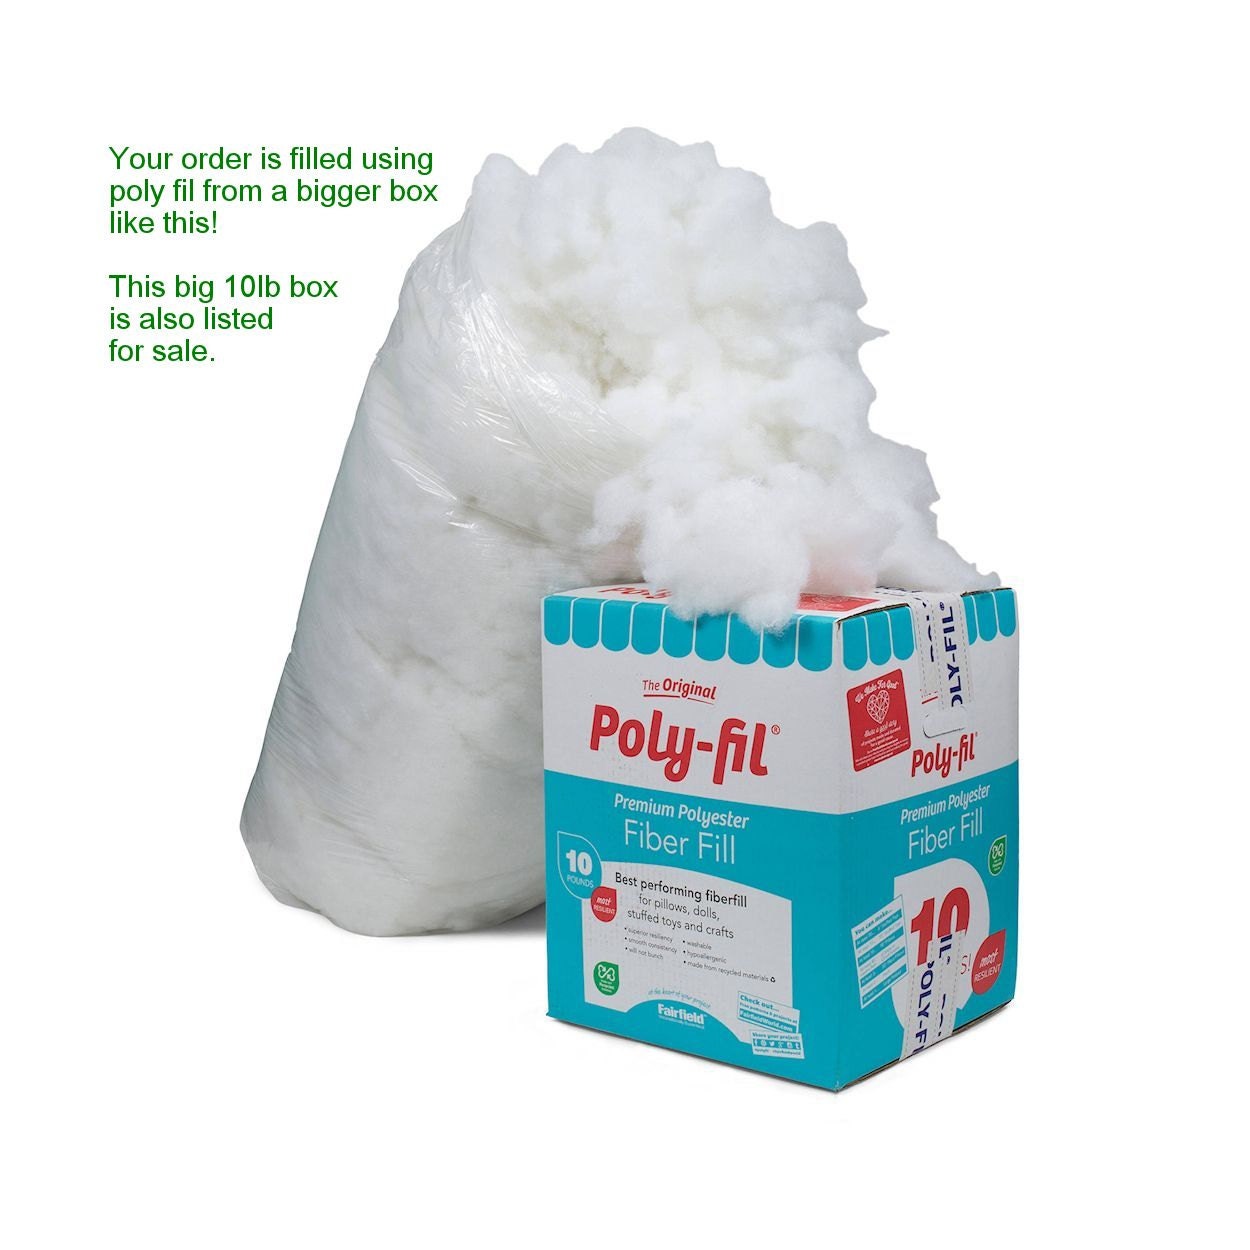 NWT 12 Oz. Fairfield Polyester Fiber Filling Stuffing Poly-fil crafting  sewing